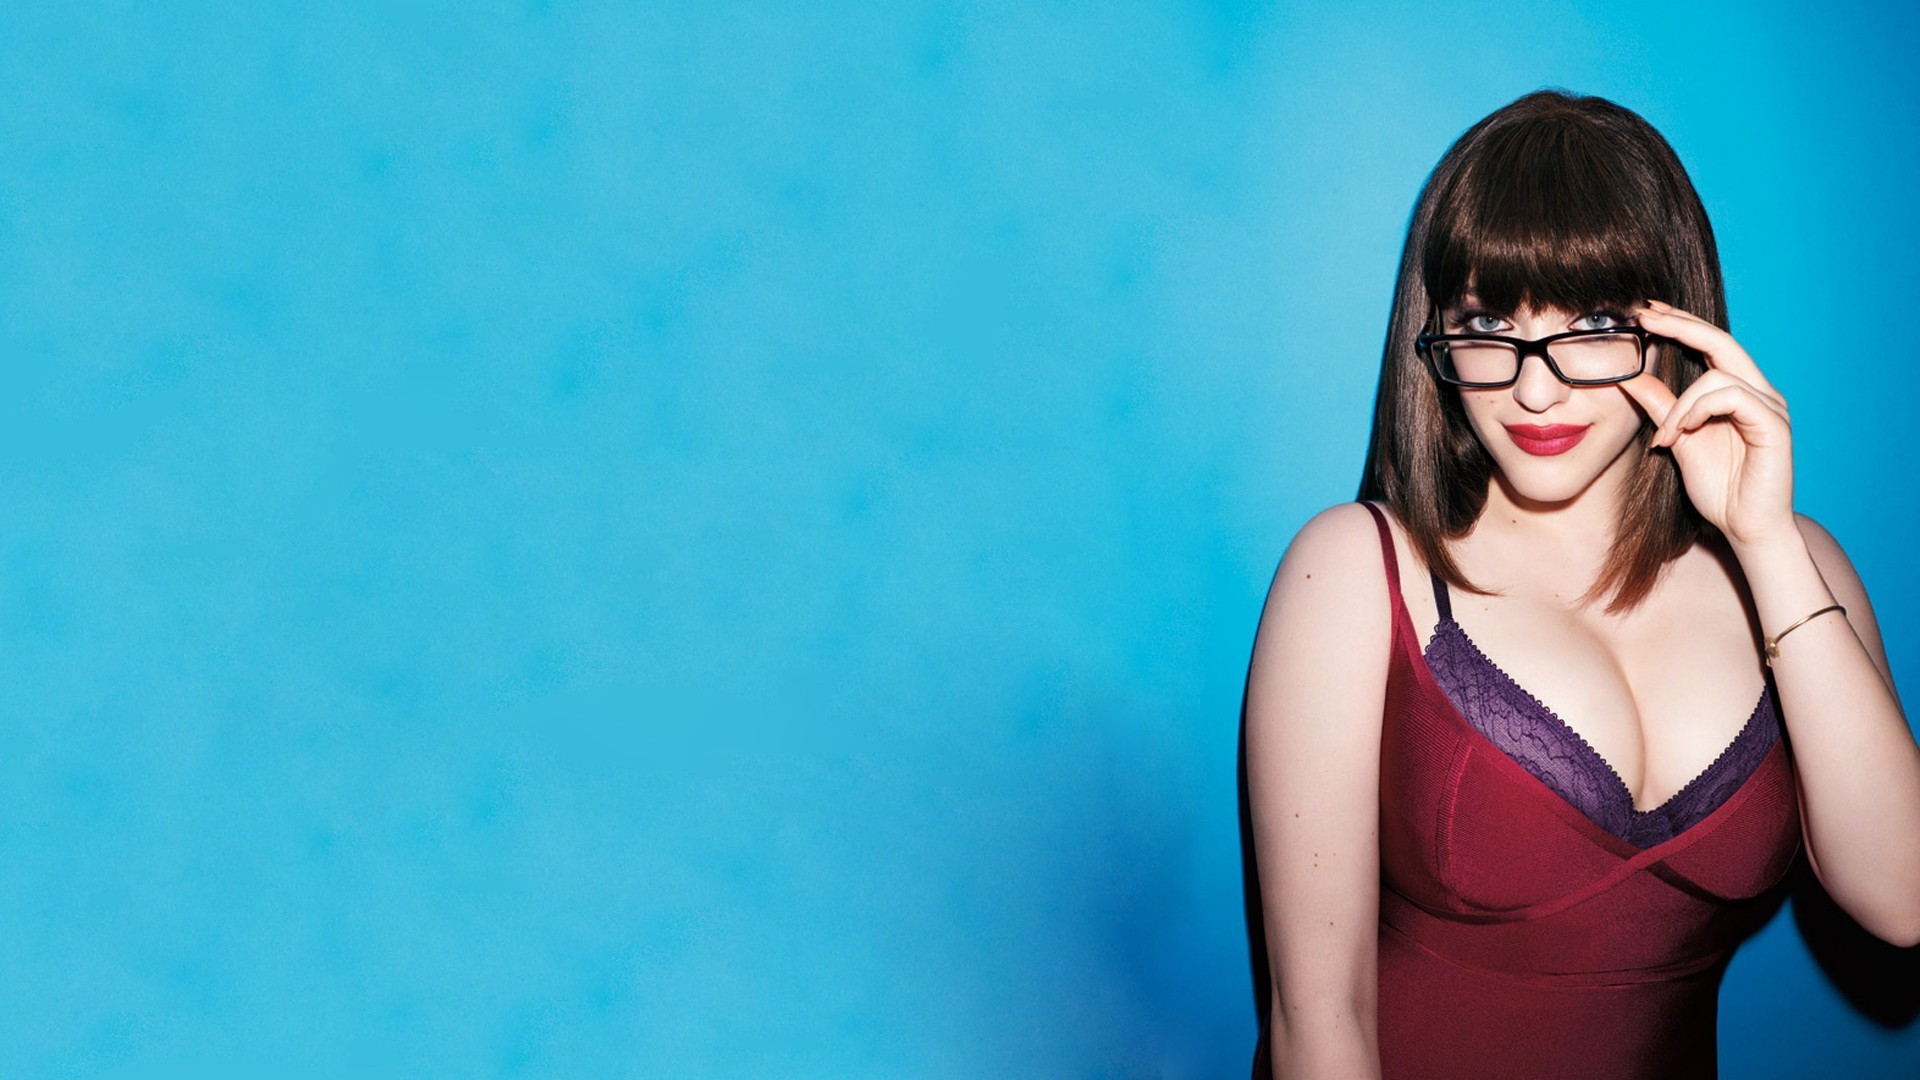 People 1920x1080 Kat Dennings actress brunette cleavage glasses women women with glasses blue blue background cyan cyan background gradient boobs studio women indoors simple background red lipstick looking at viewer